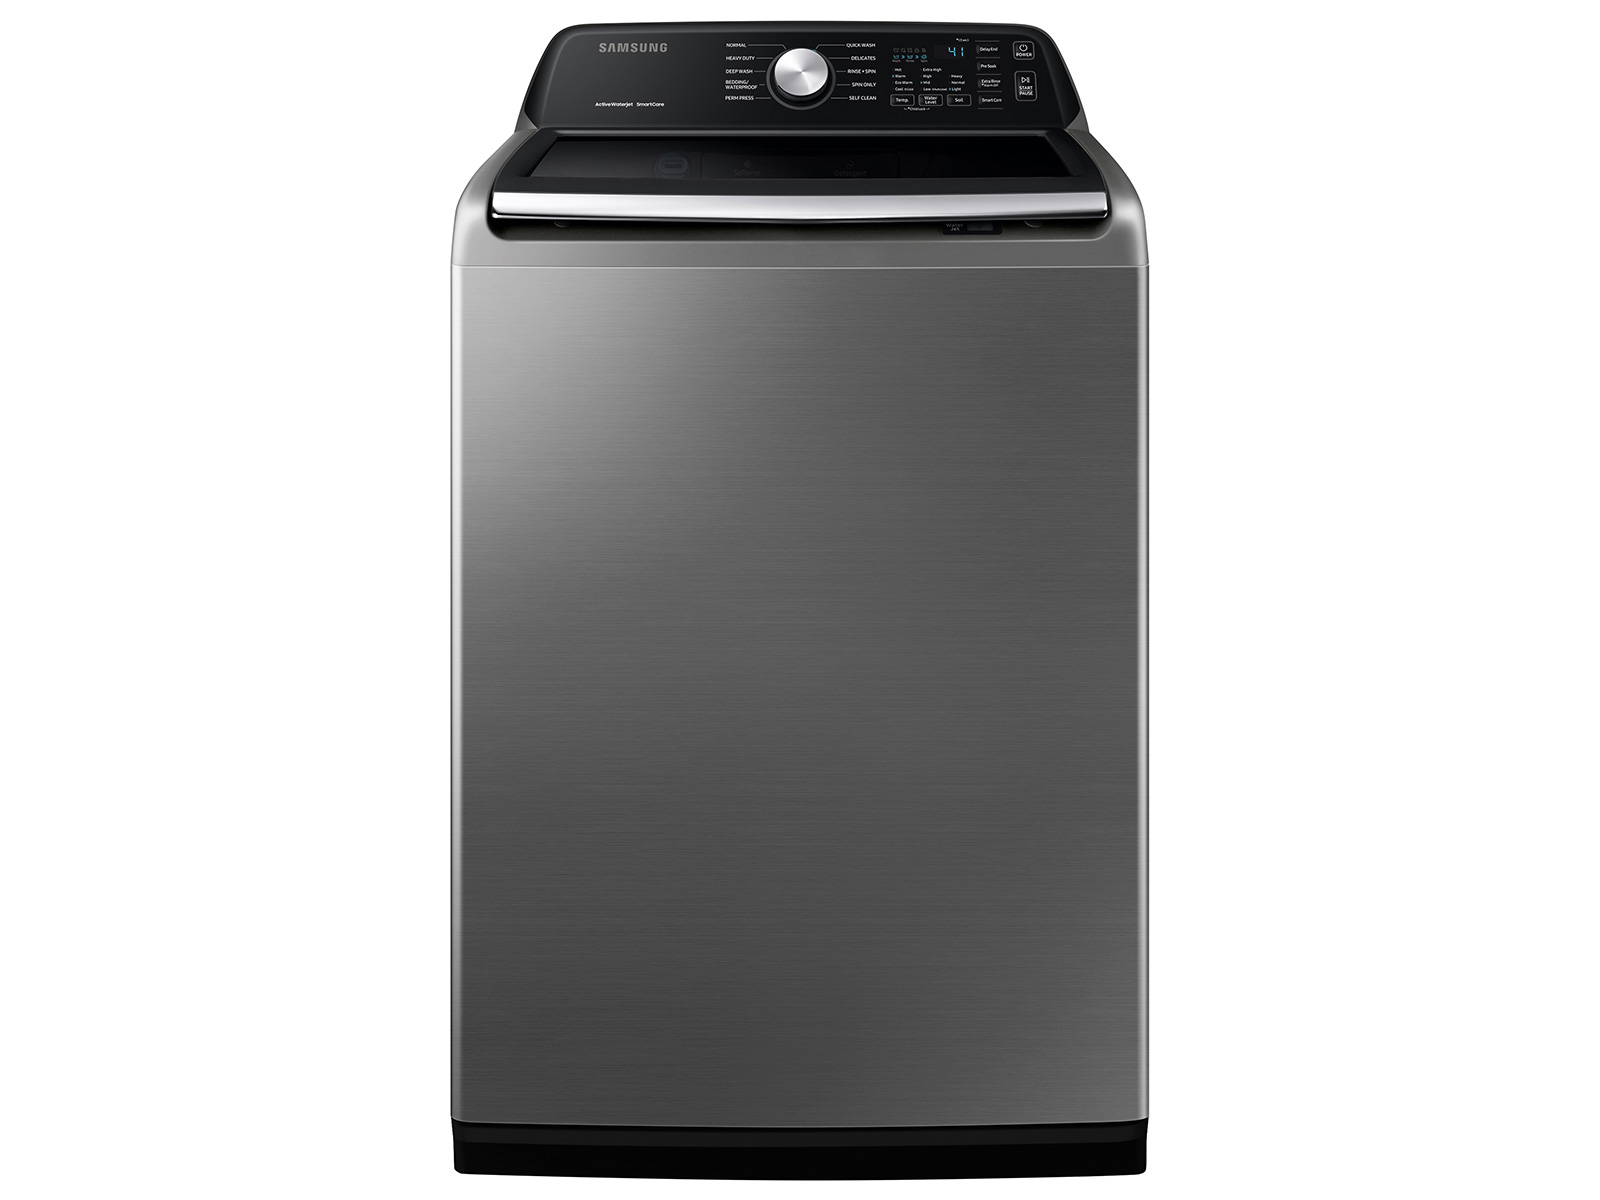 Samsung 4.5 cu. ft. Capacity Top Load Washer with Active WaterJet in Platinum(WA45T3400AP/A4)